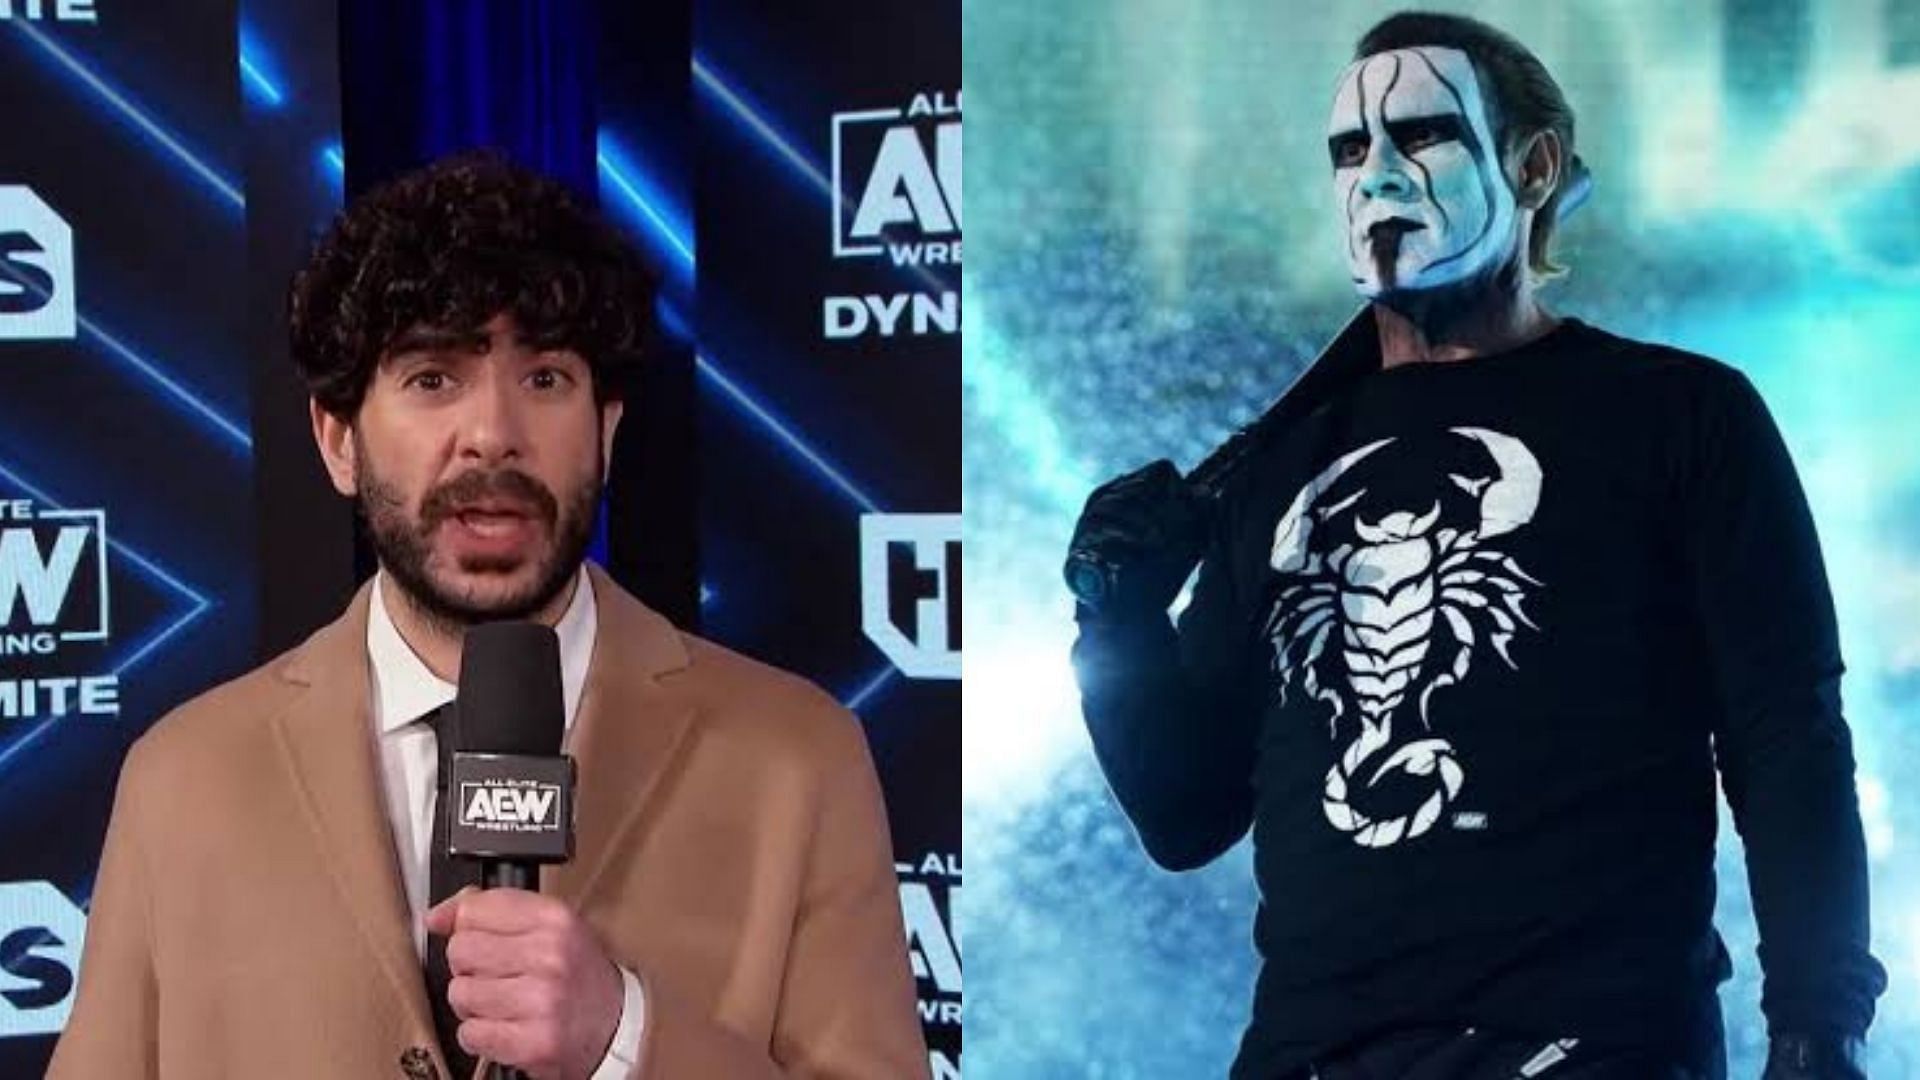 How long will Sting stick around in AEW for?